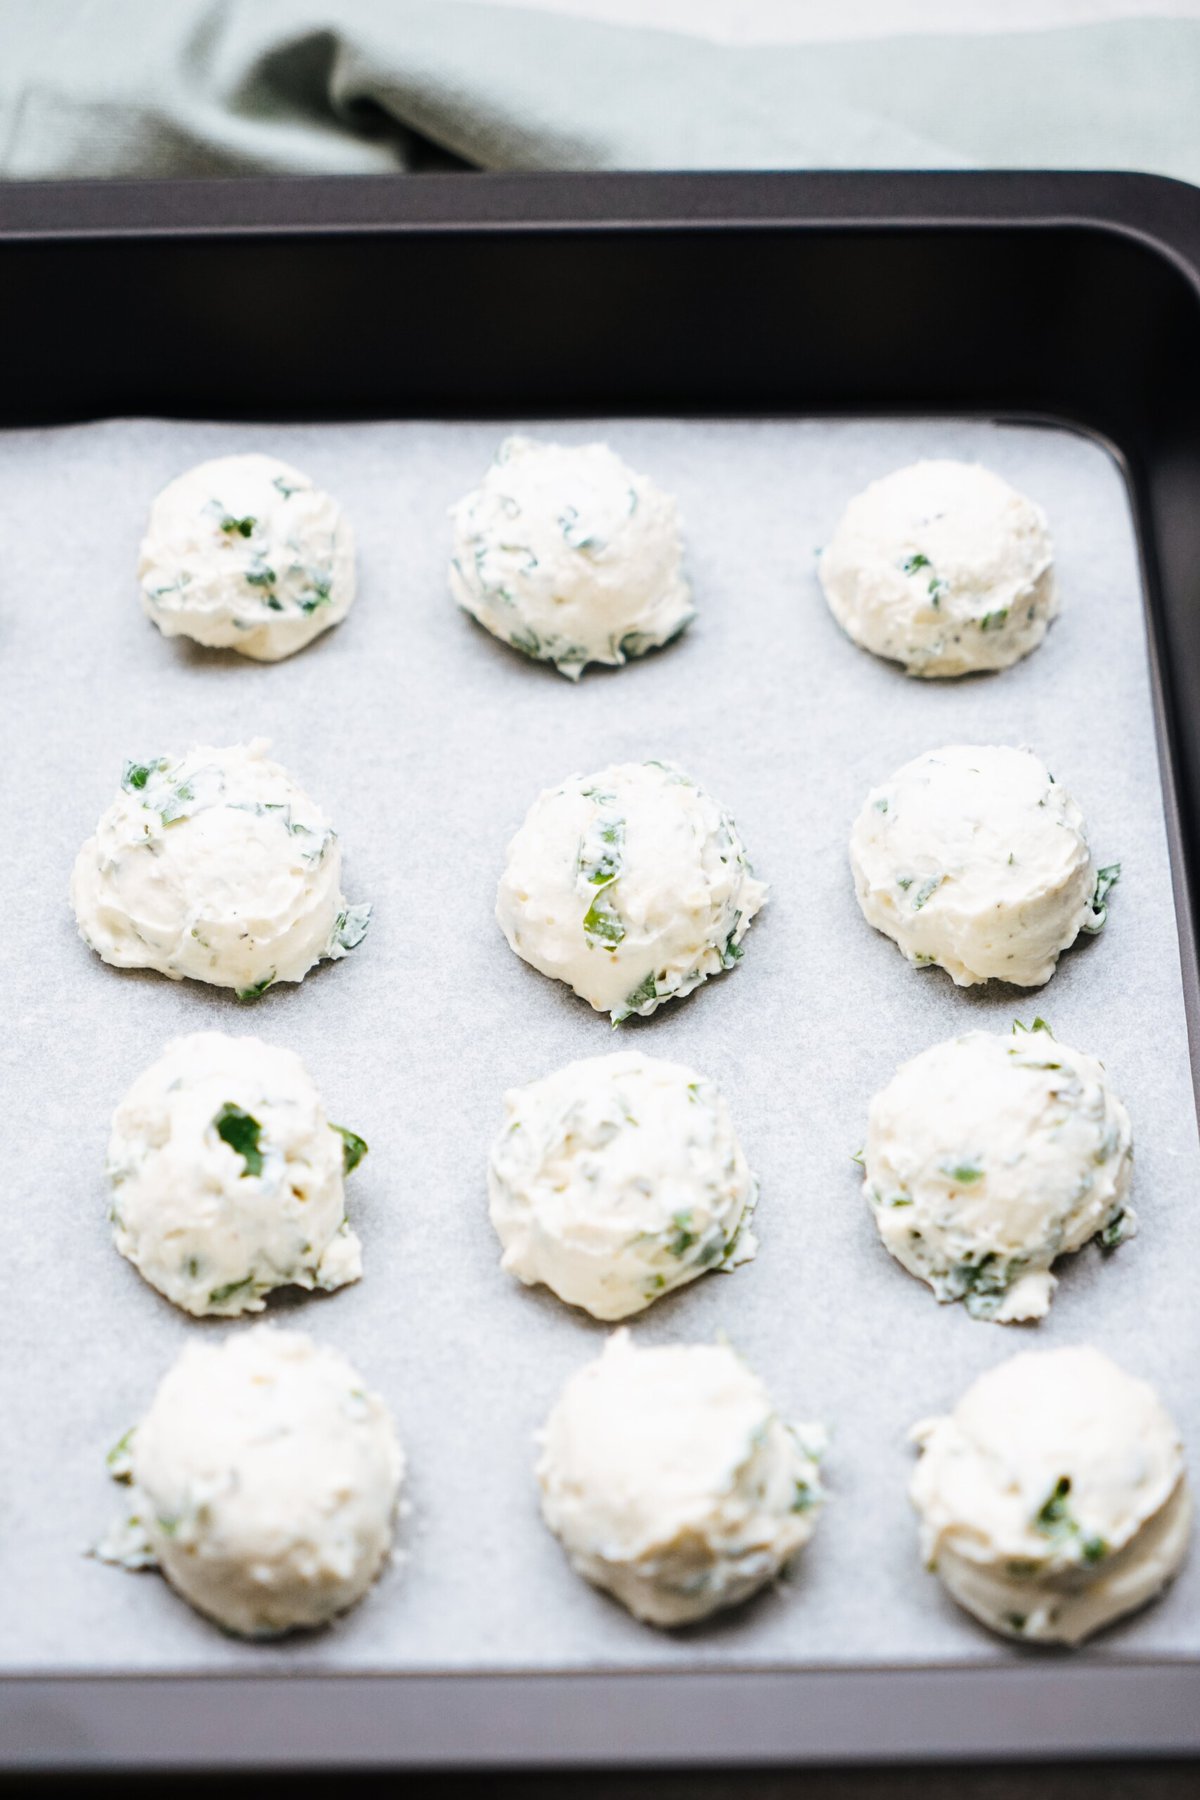 A baking tray lined with parchment paper holds twelve evenly spaced scoops of an uncooked ricotta herb mixture, reminiscent of goat cheese truffles.